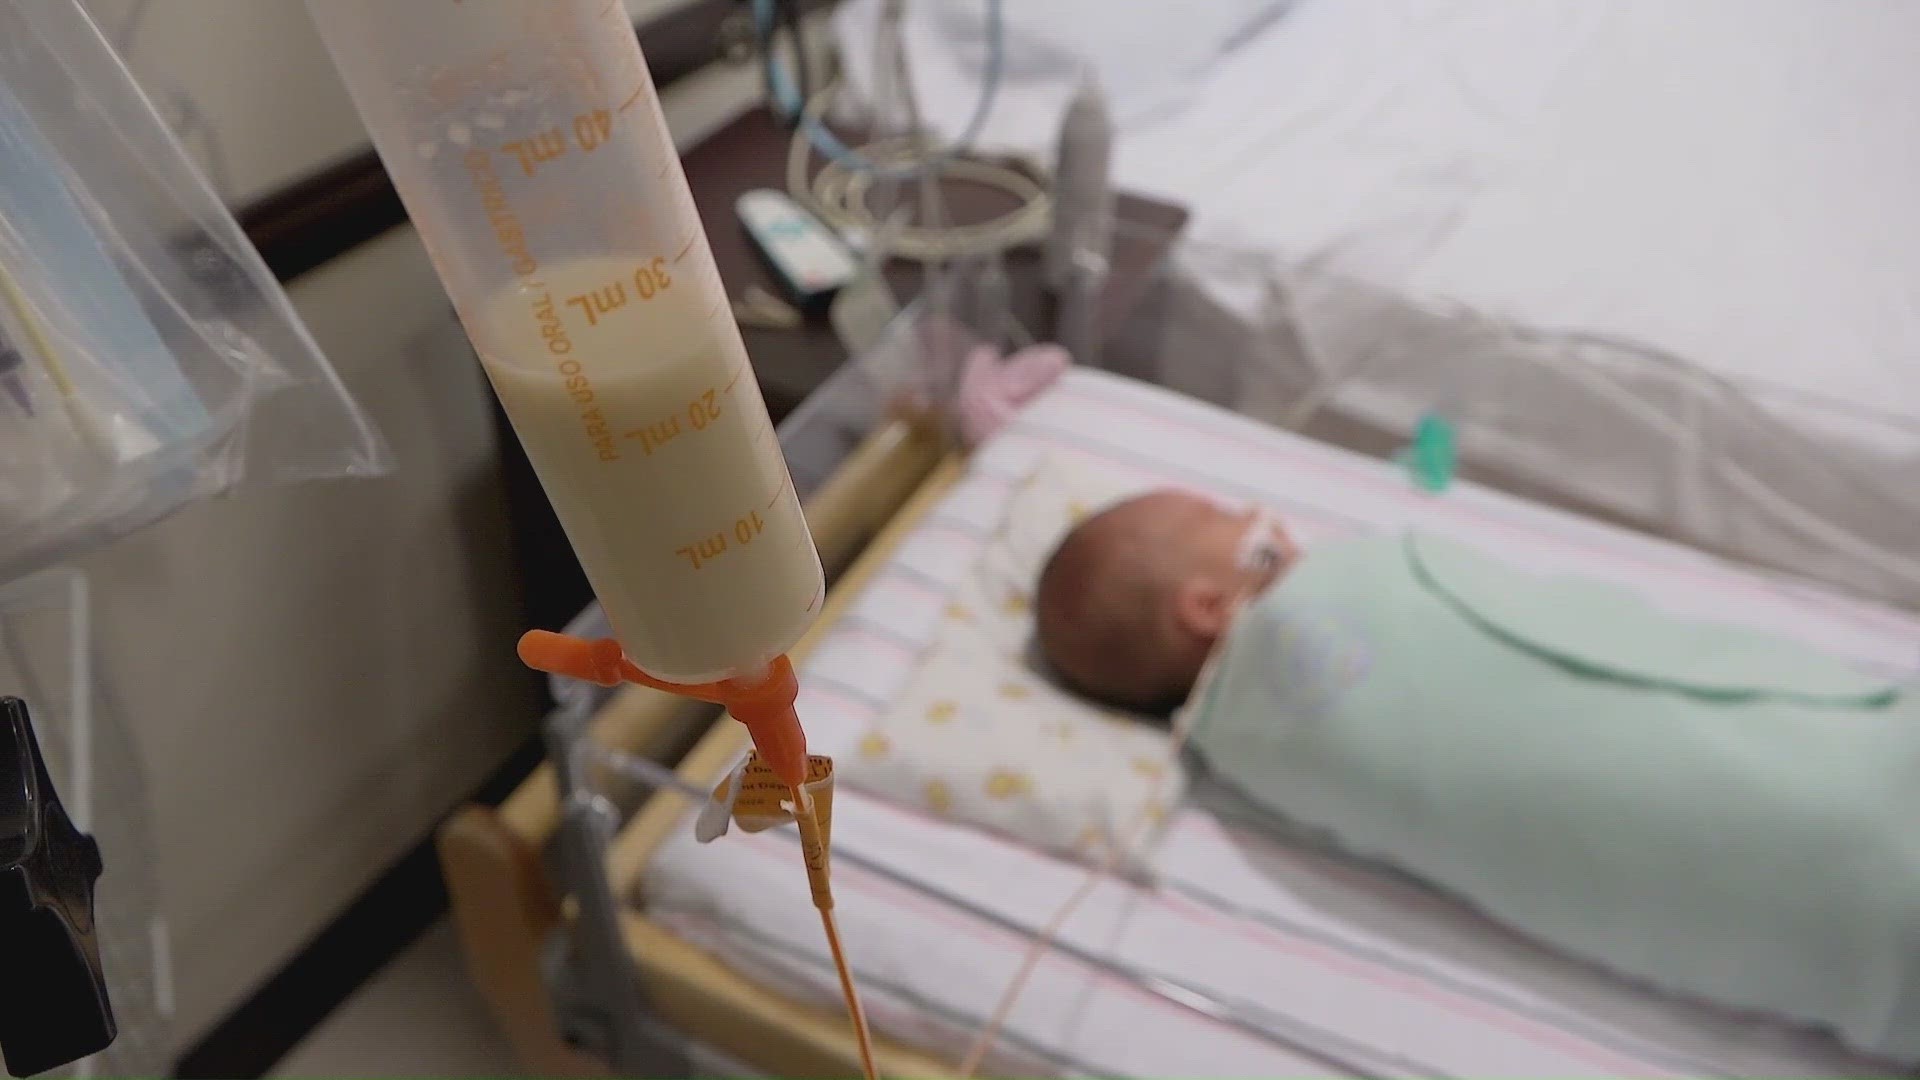 A study published last year found Black premature infants are three times more likely to contract NEC than their white counterparts. Racial disparities are hard.